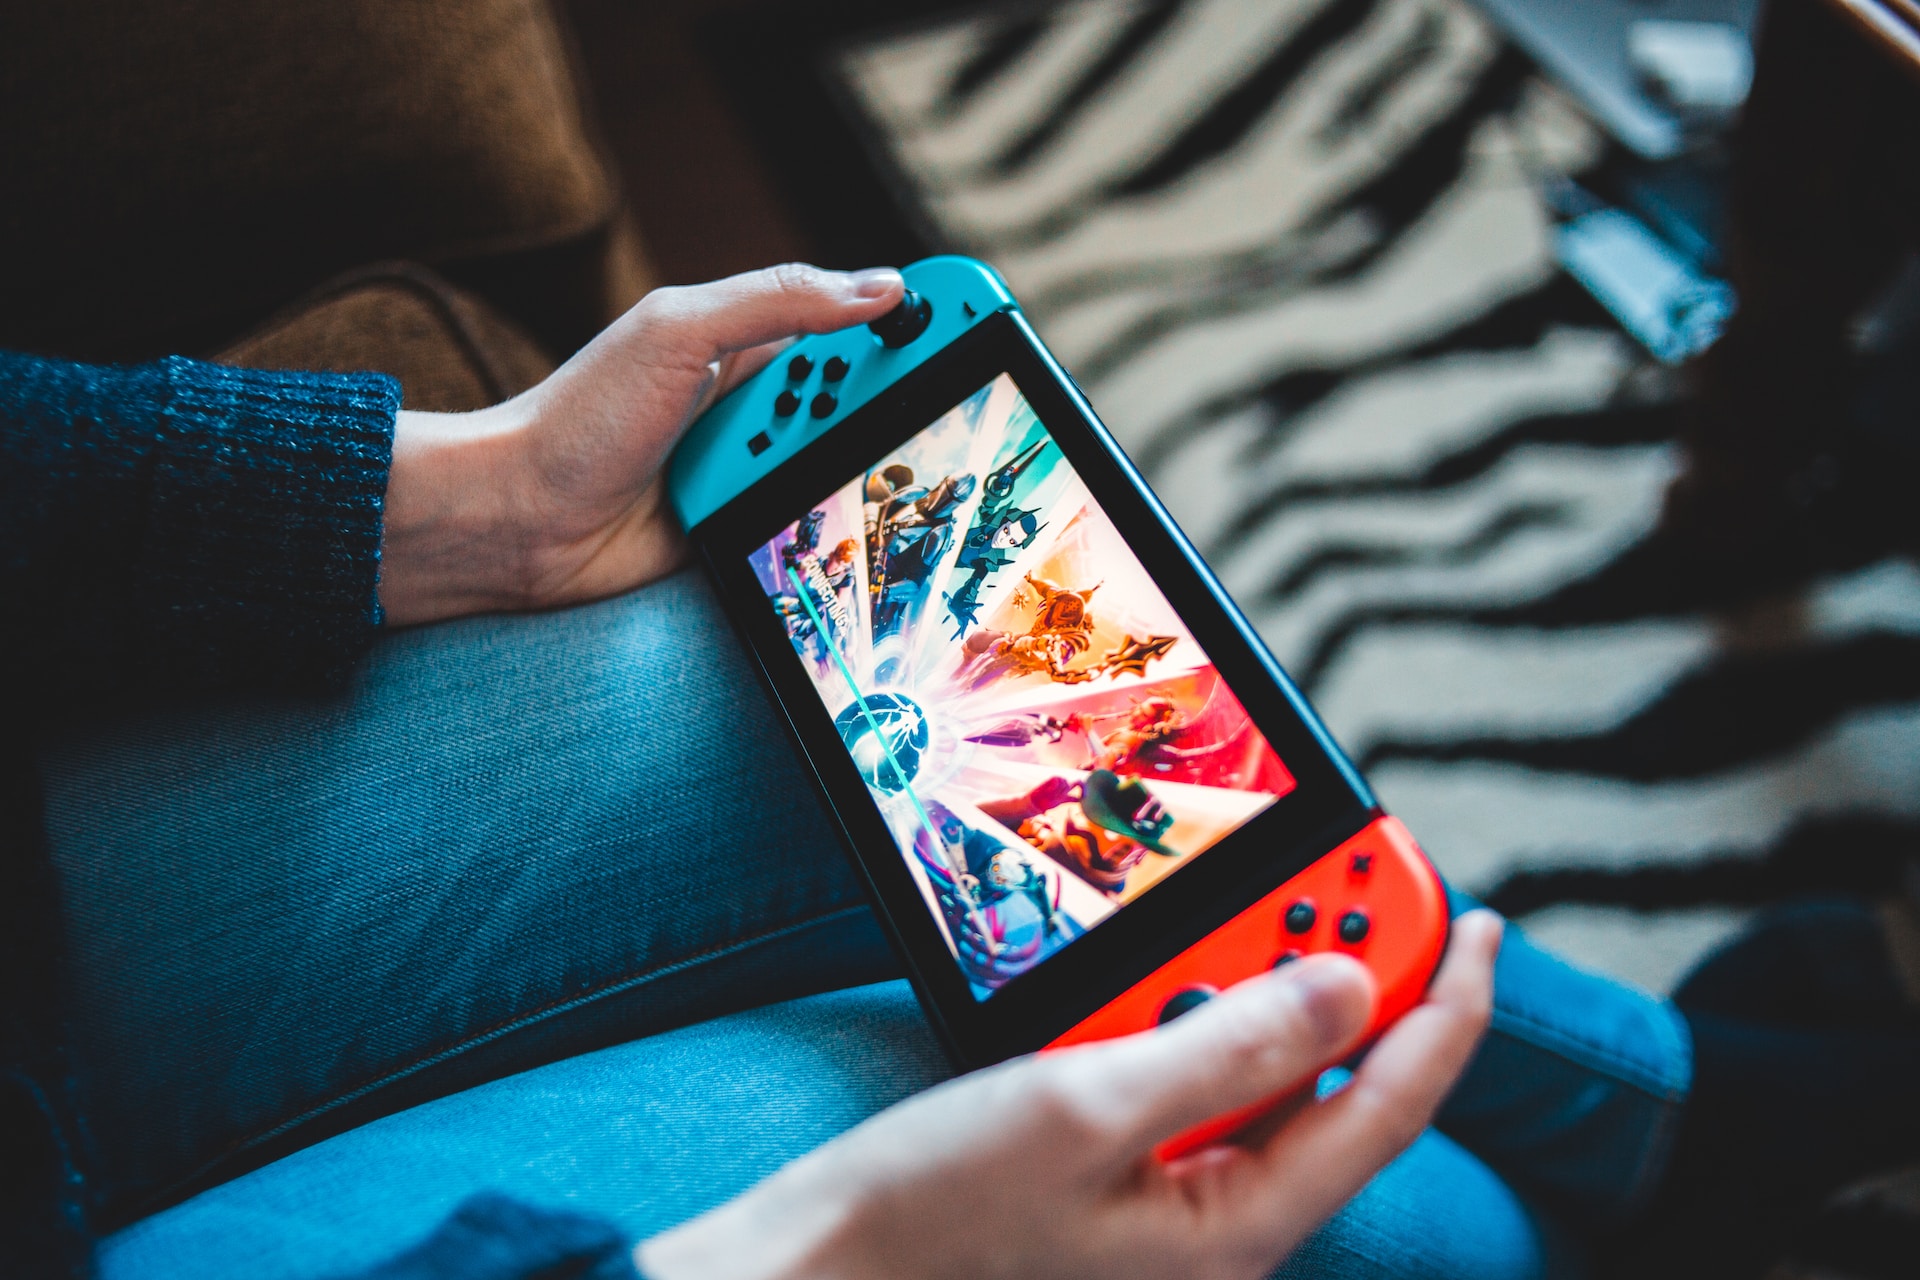 A photo of someone holding a Nintendo Switch console